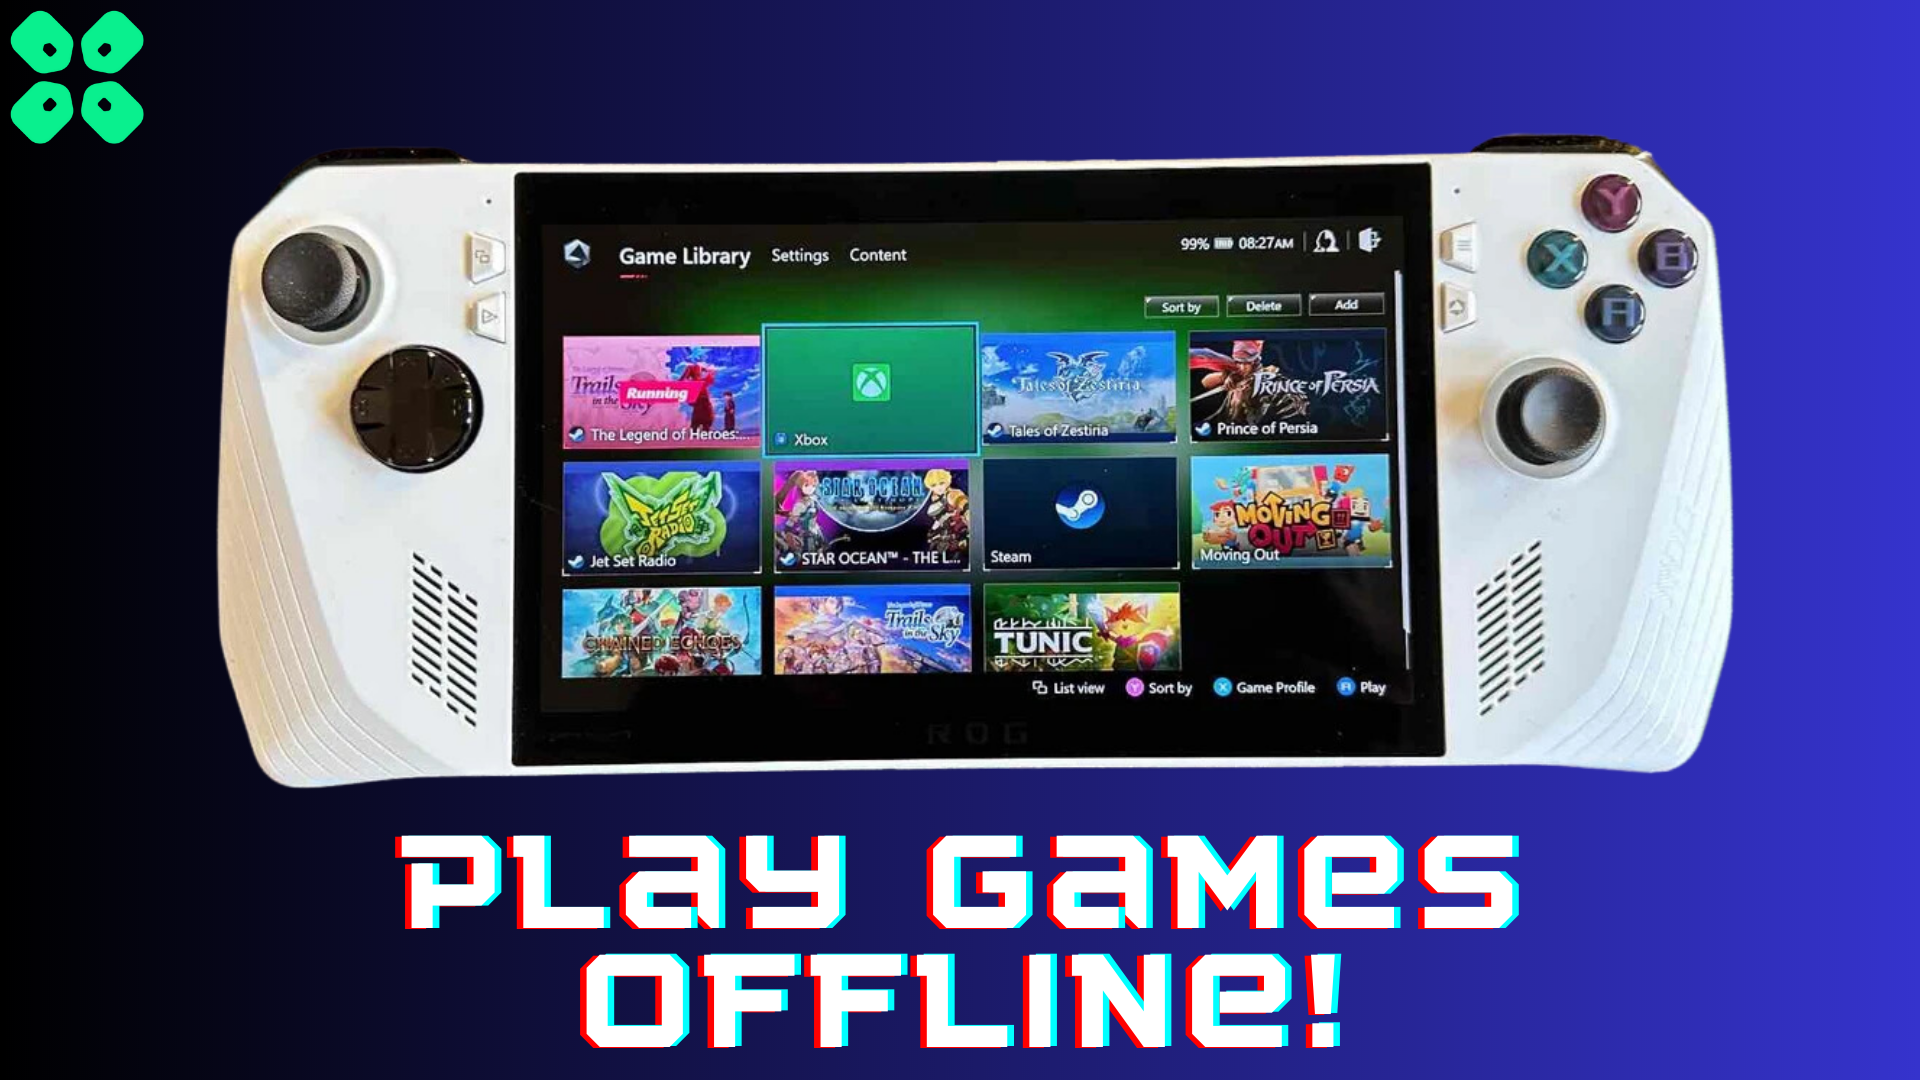 How to play Game Pass games offline.